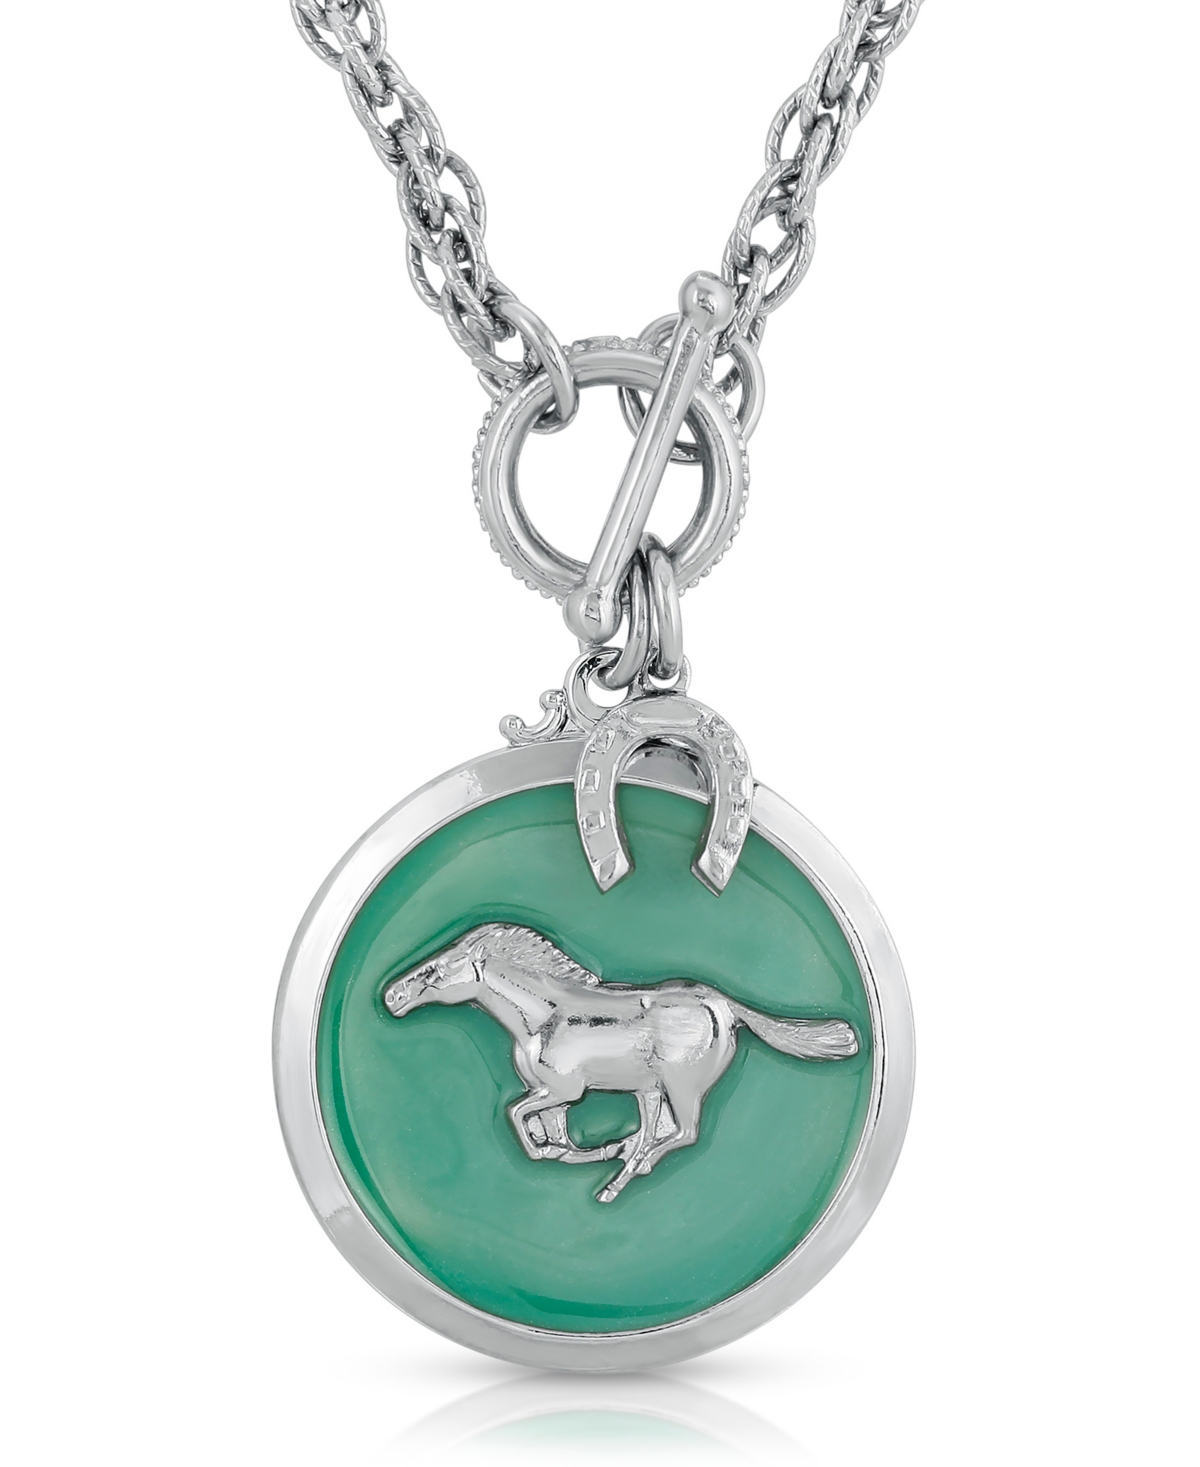 2028 Silver-tone Enamel Horse Pendant Toggle Necklace In Turquoise